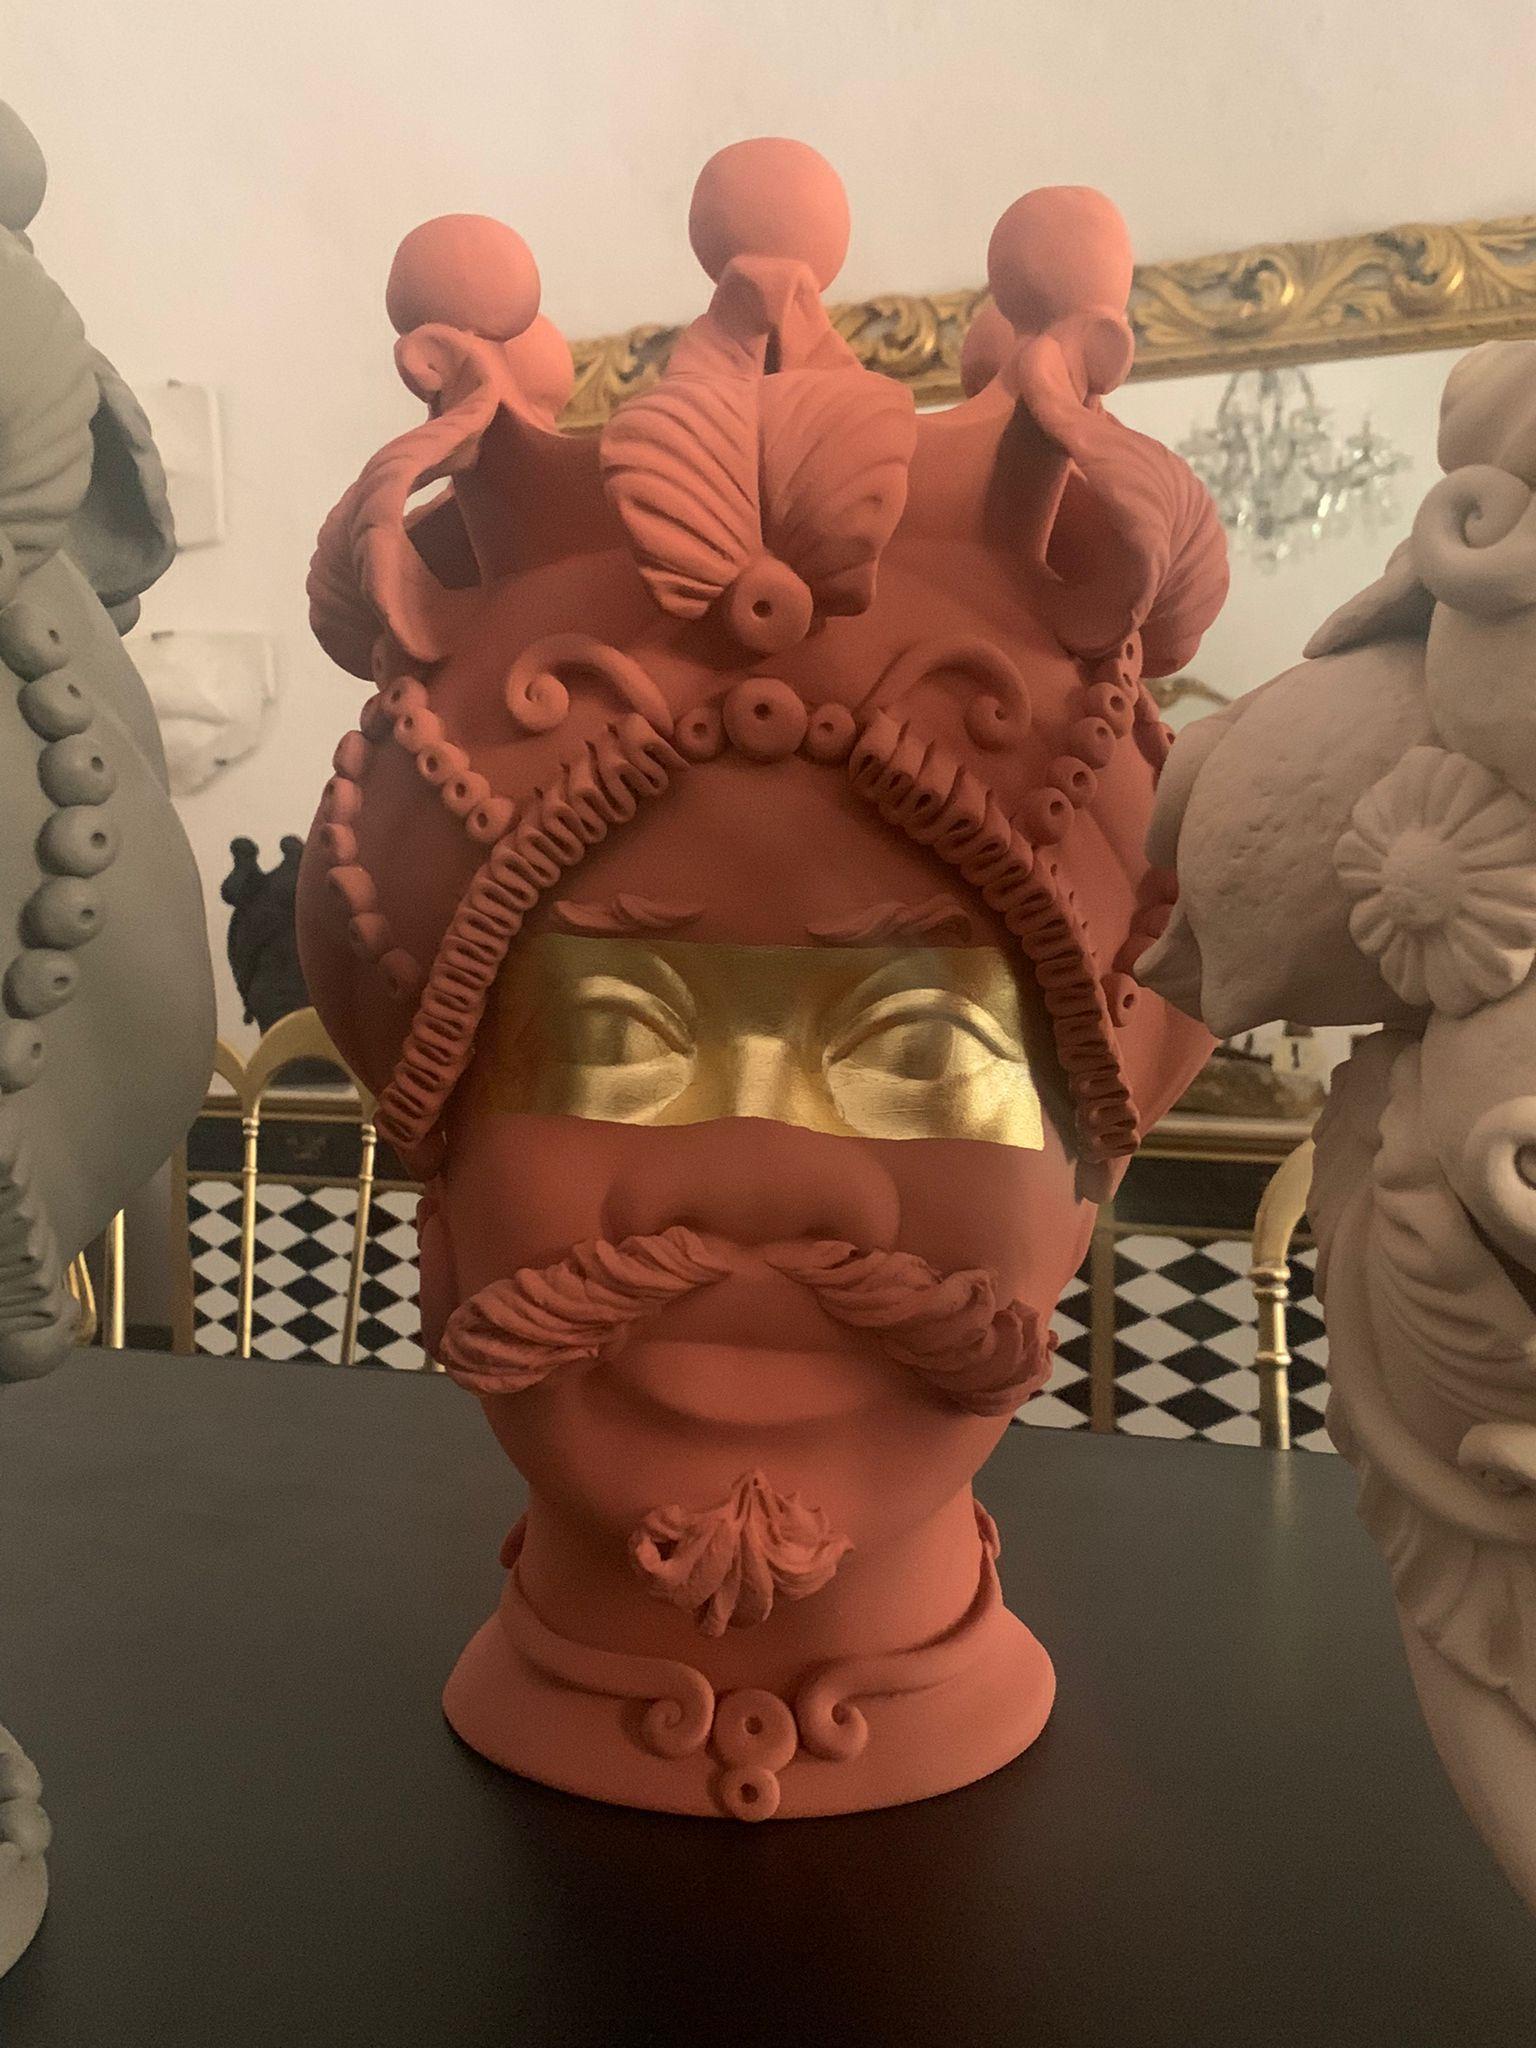 Modern Collection of 4 Vases Moor Head, Handmade in Italy, 2019, Unique Design For Sale